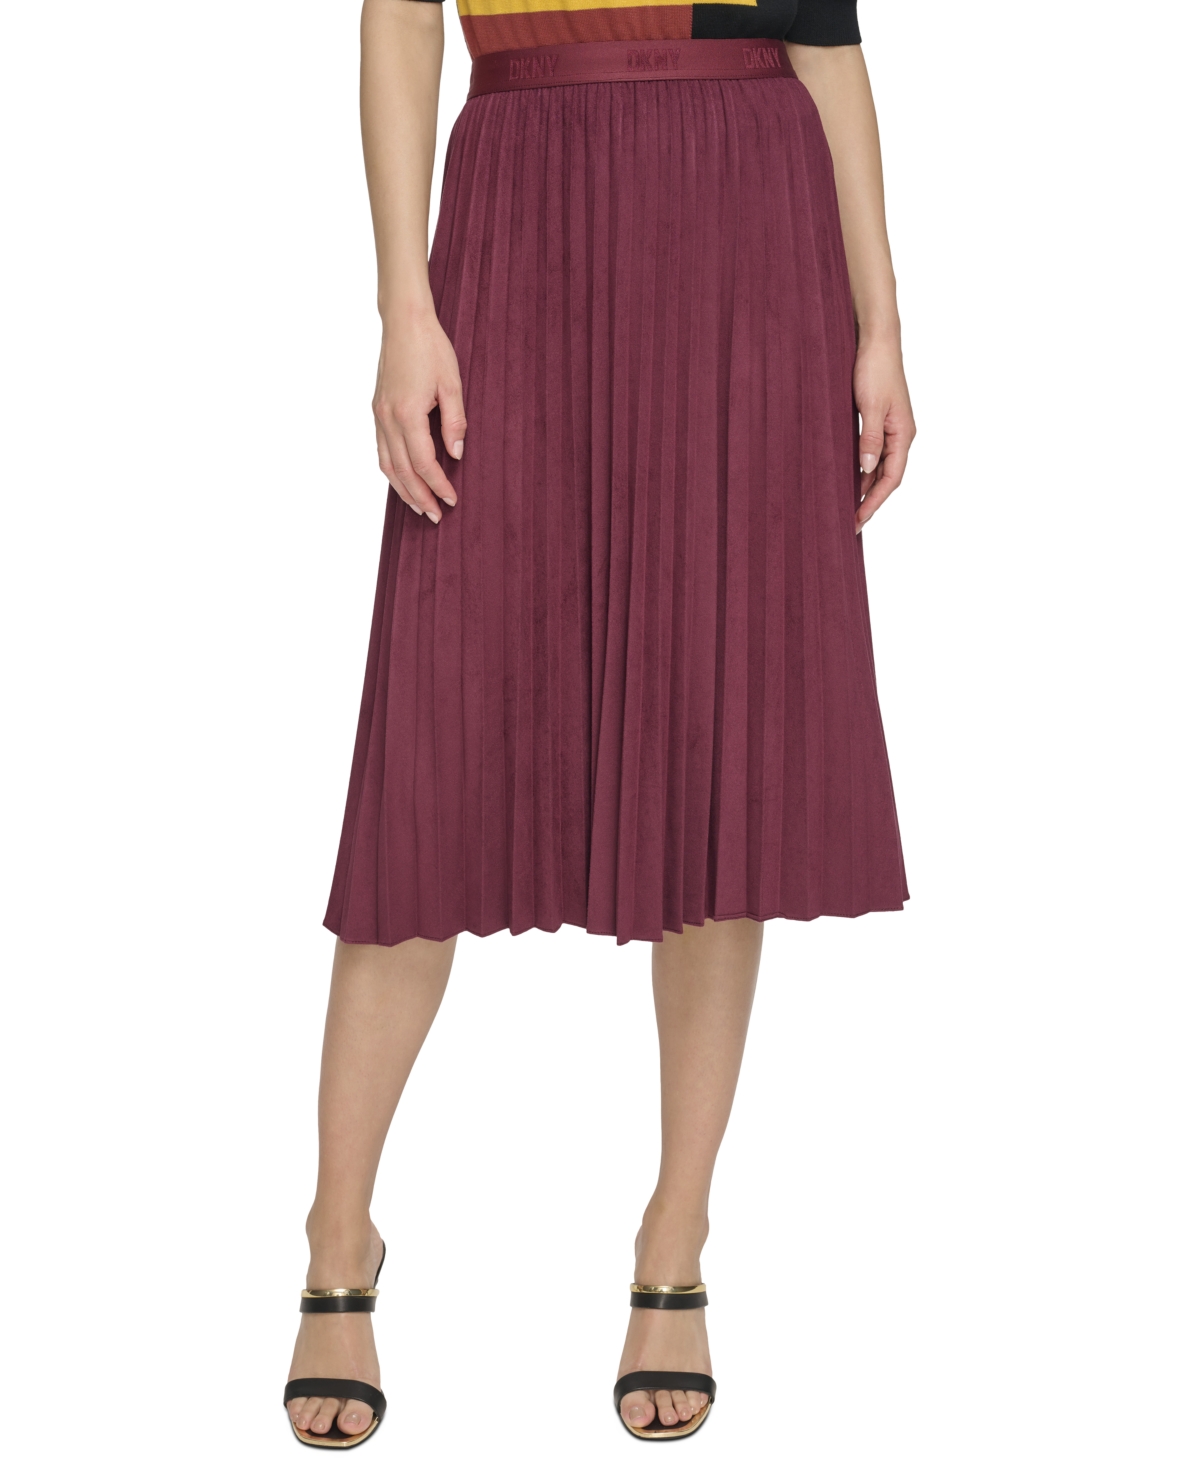 Dkny Women's Pleated Faux Suede Skirt In Cabernet